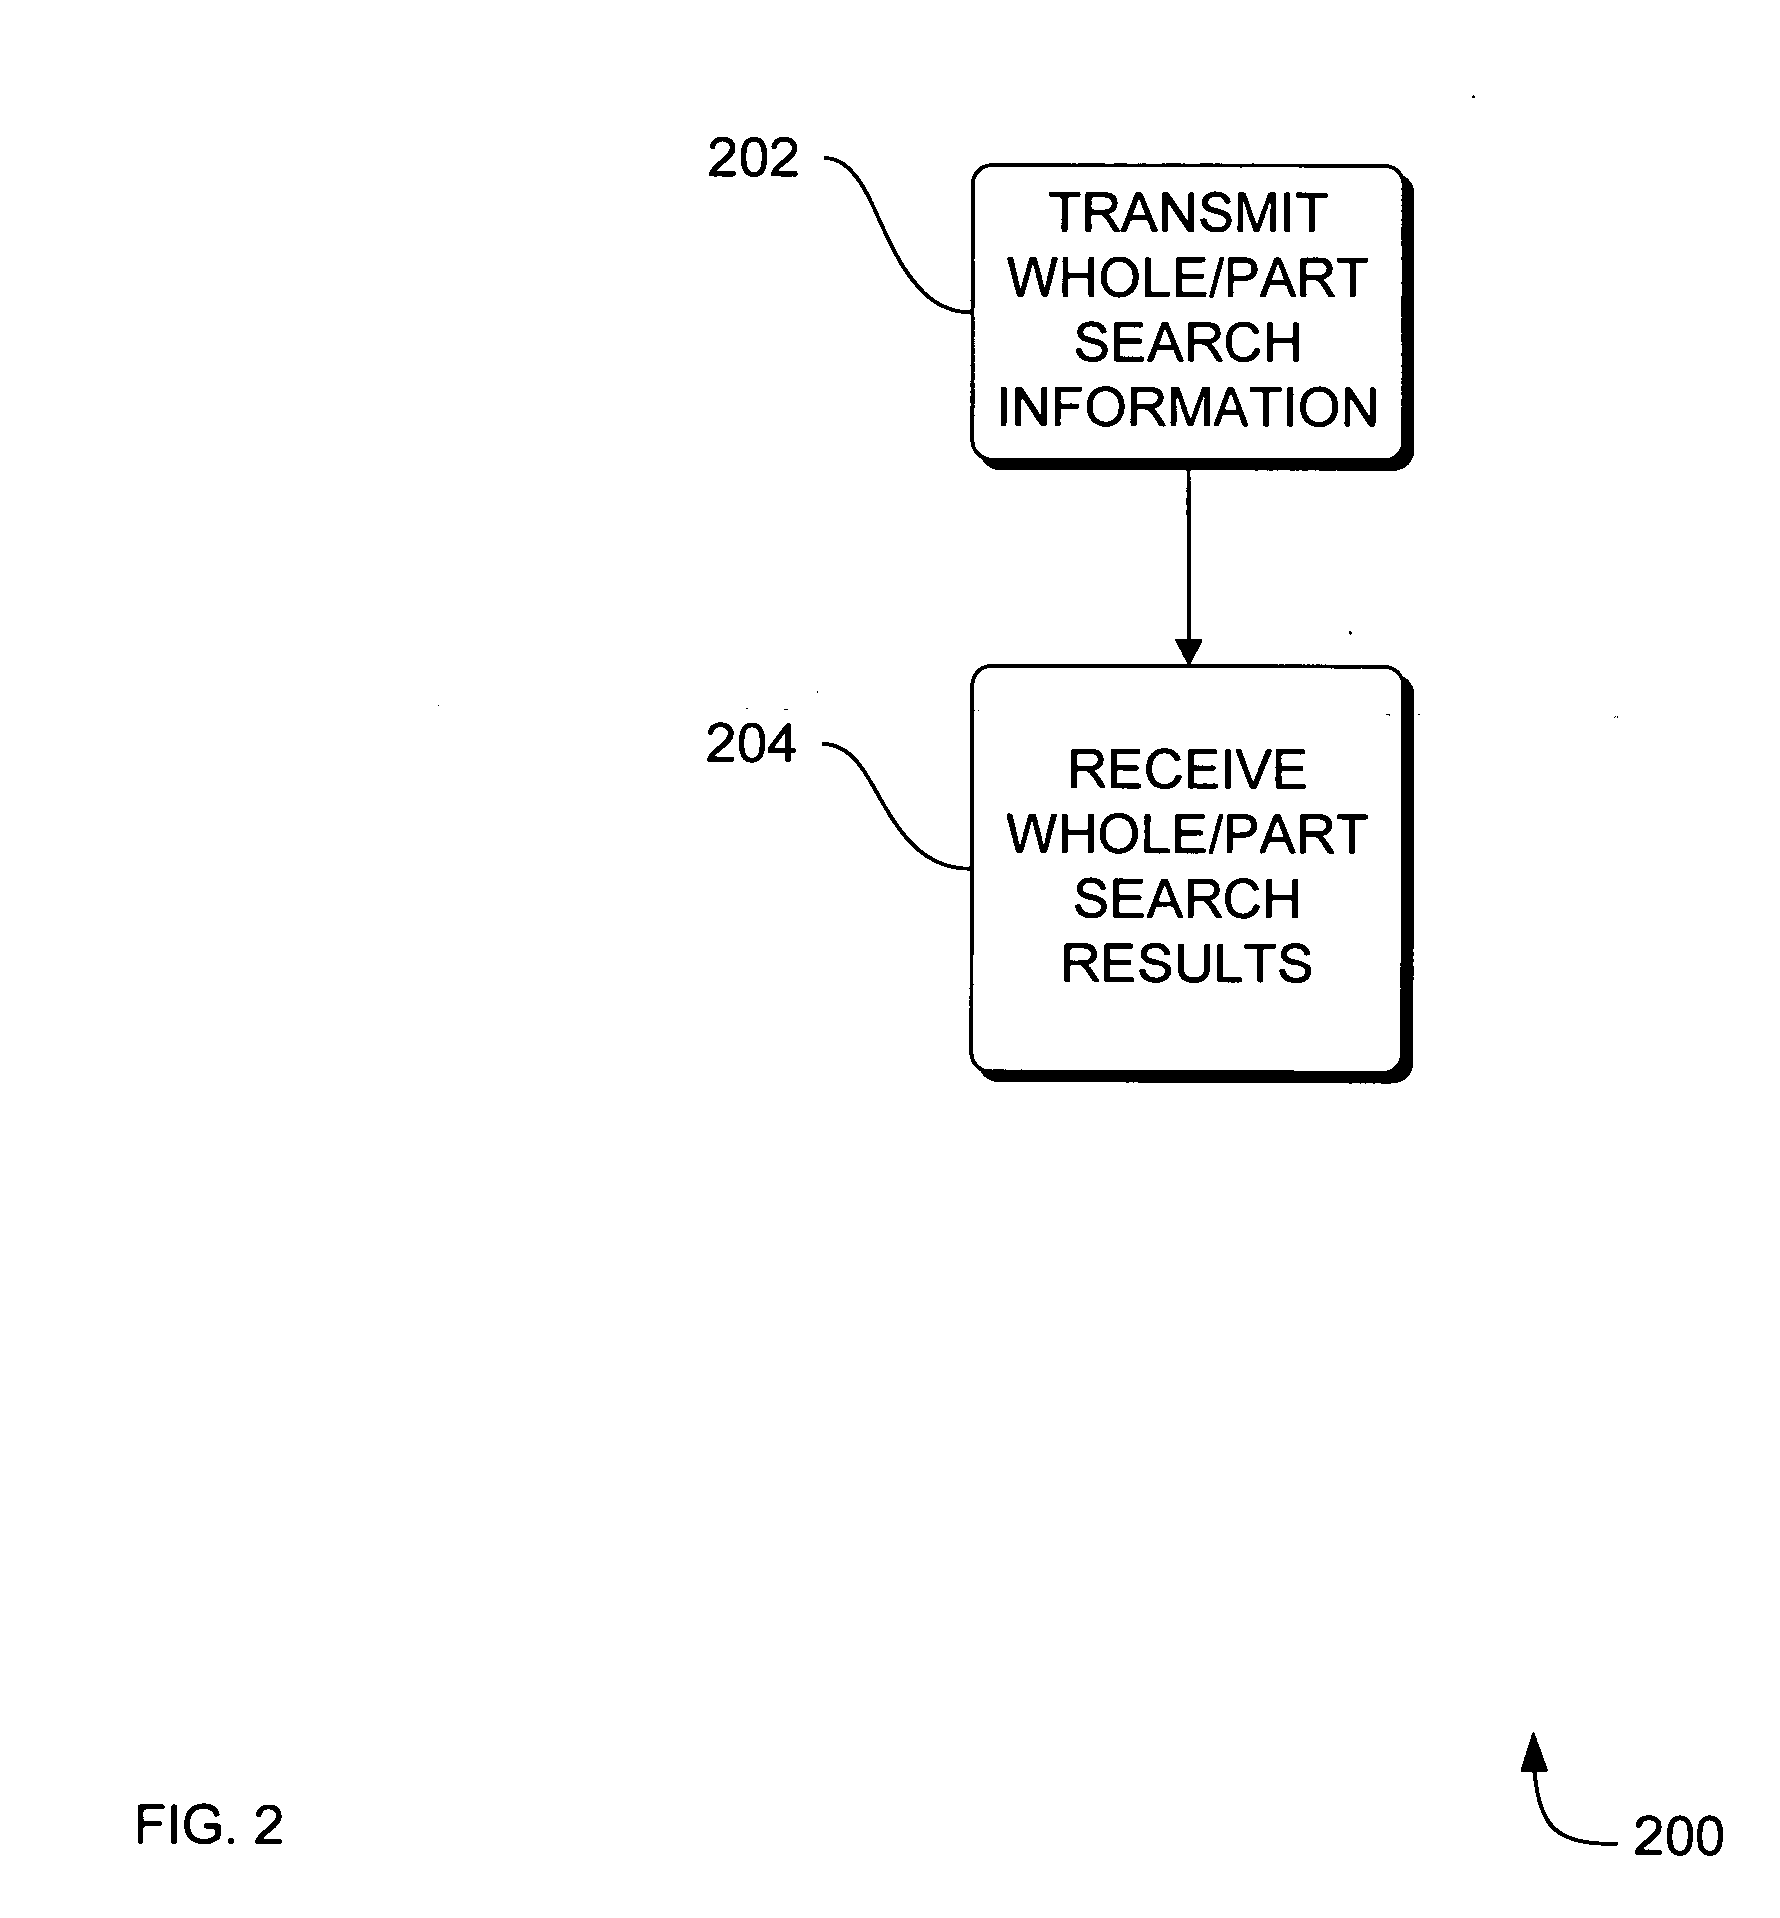 Systems, methods and apparatus of transformation and indexing of data for access by a search engine in a whole/part search